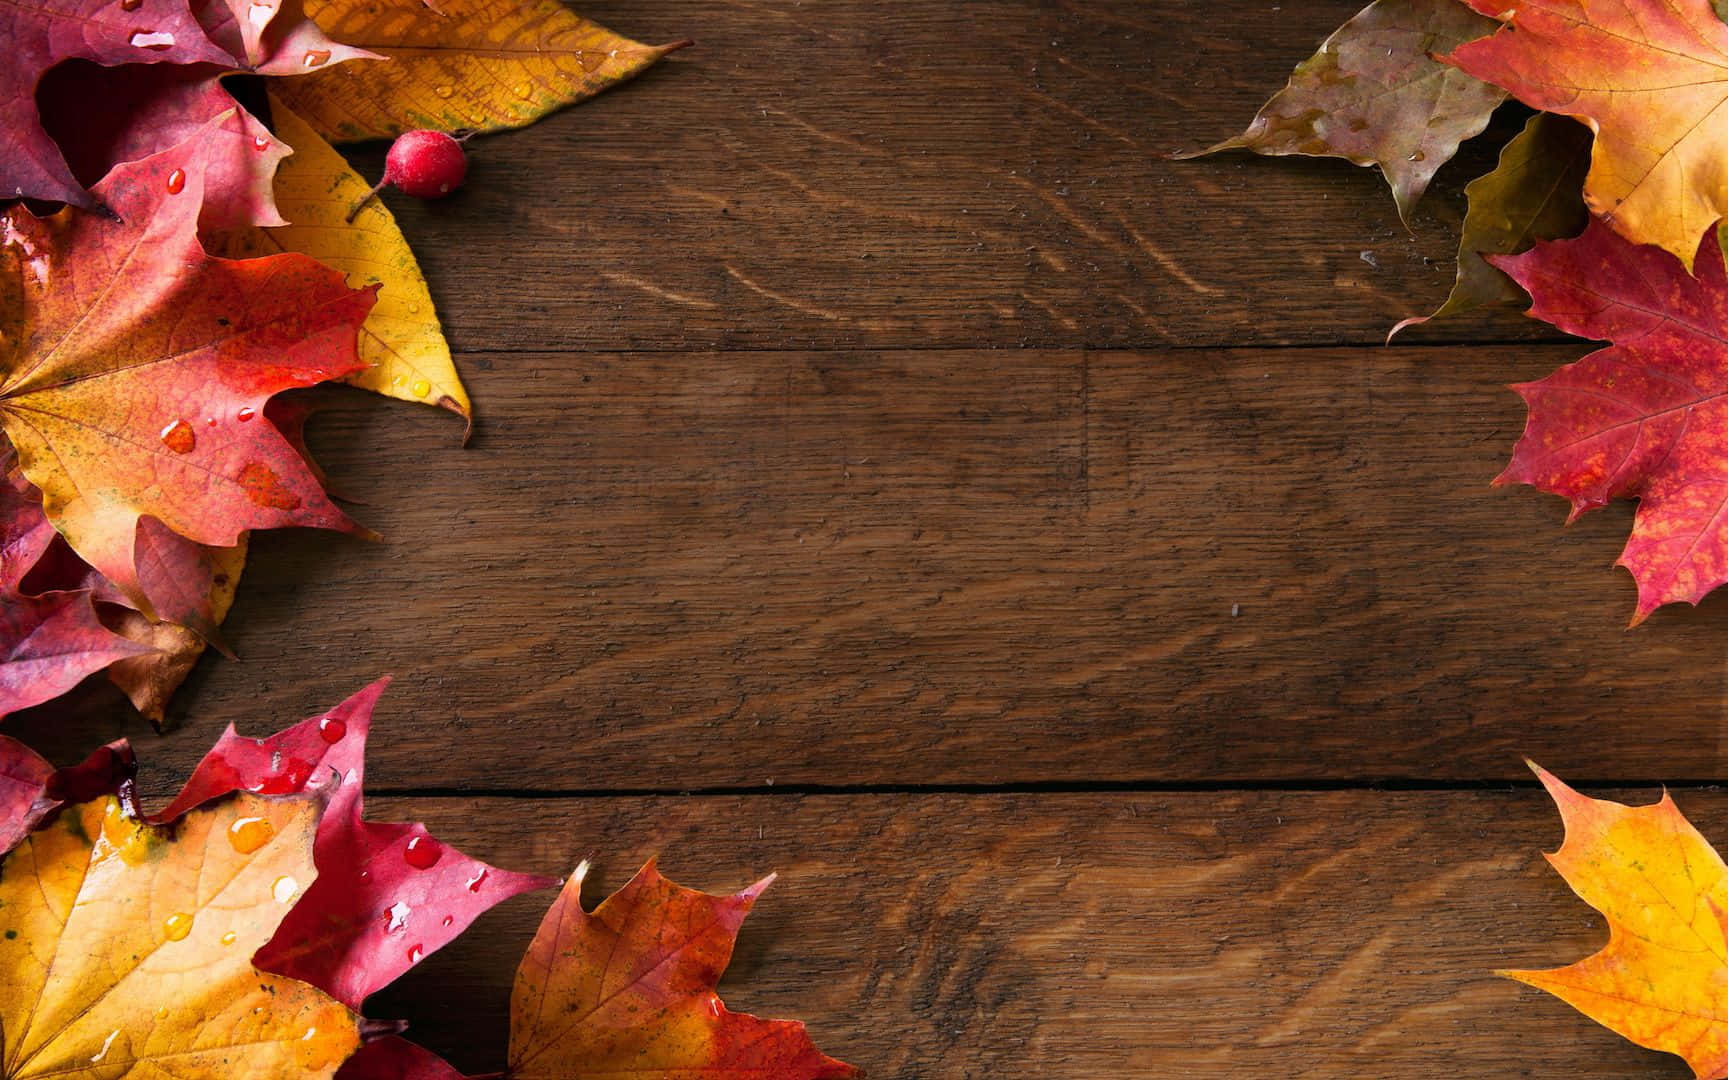 Autumn Leaves Wooden Background Wallpaper